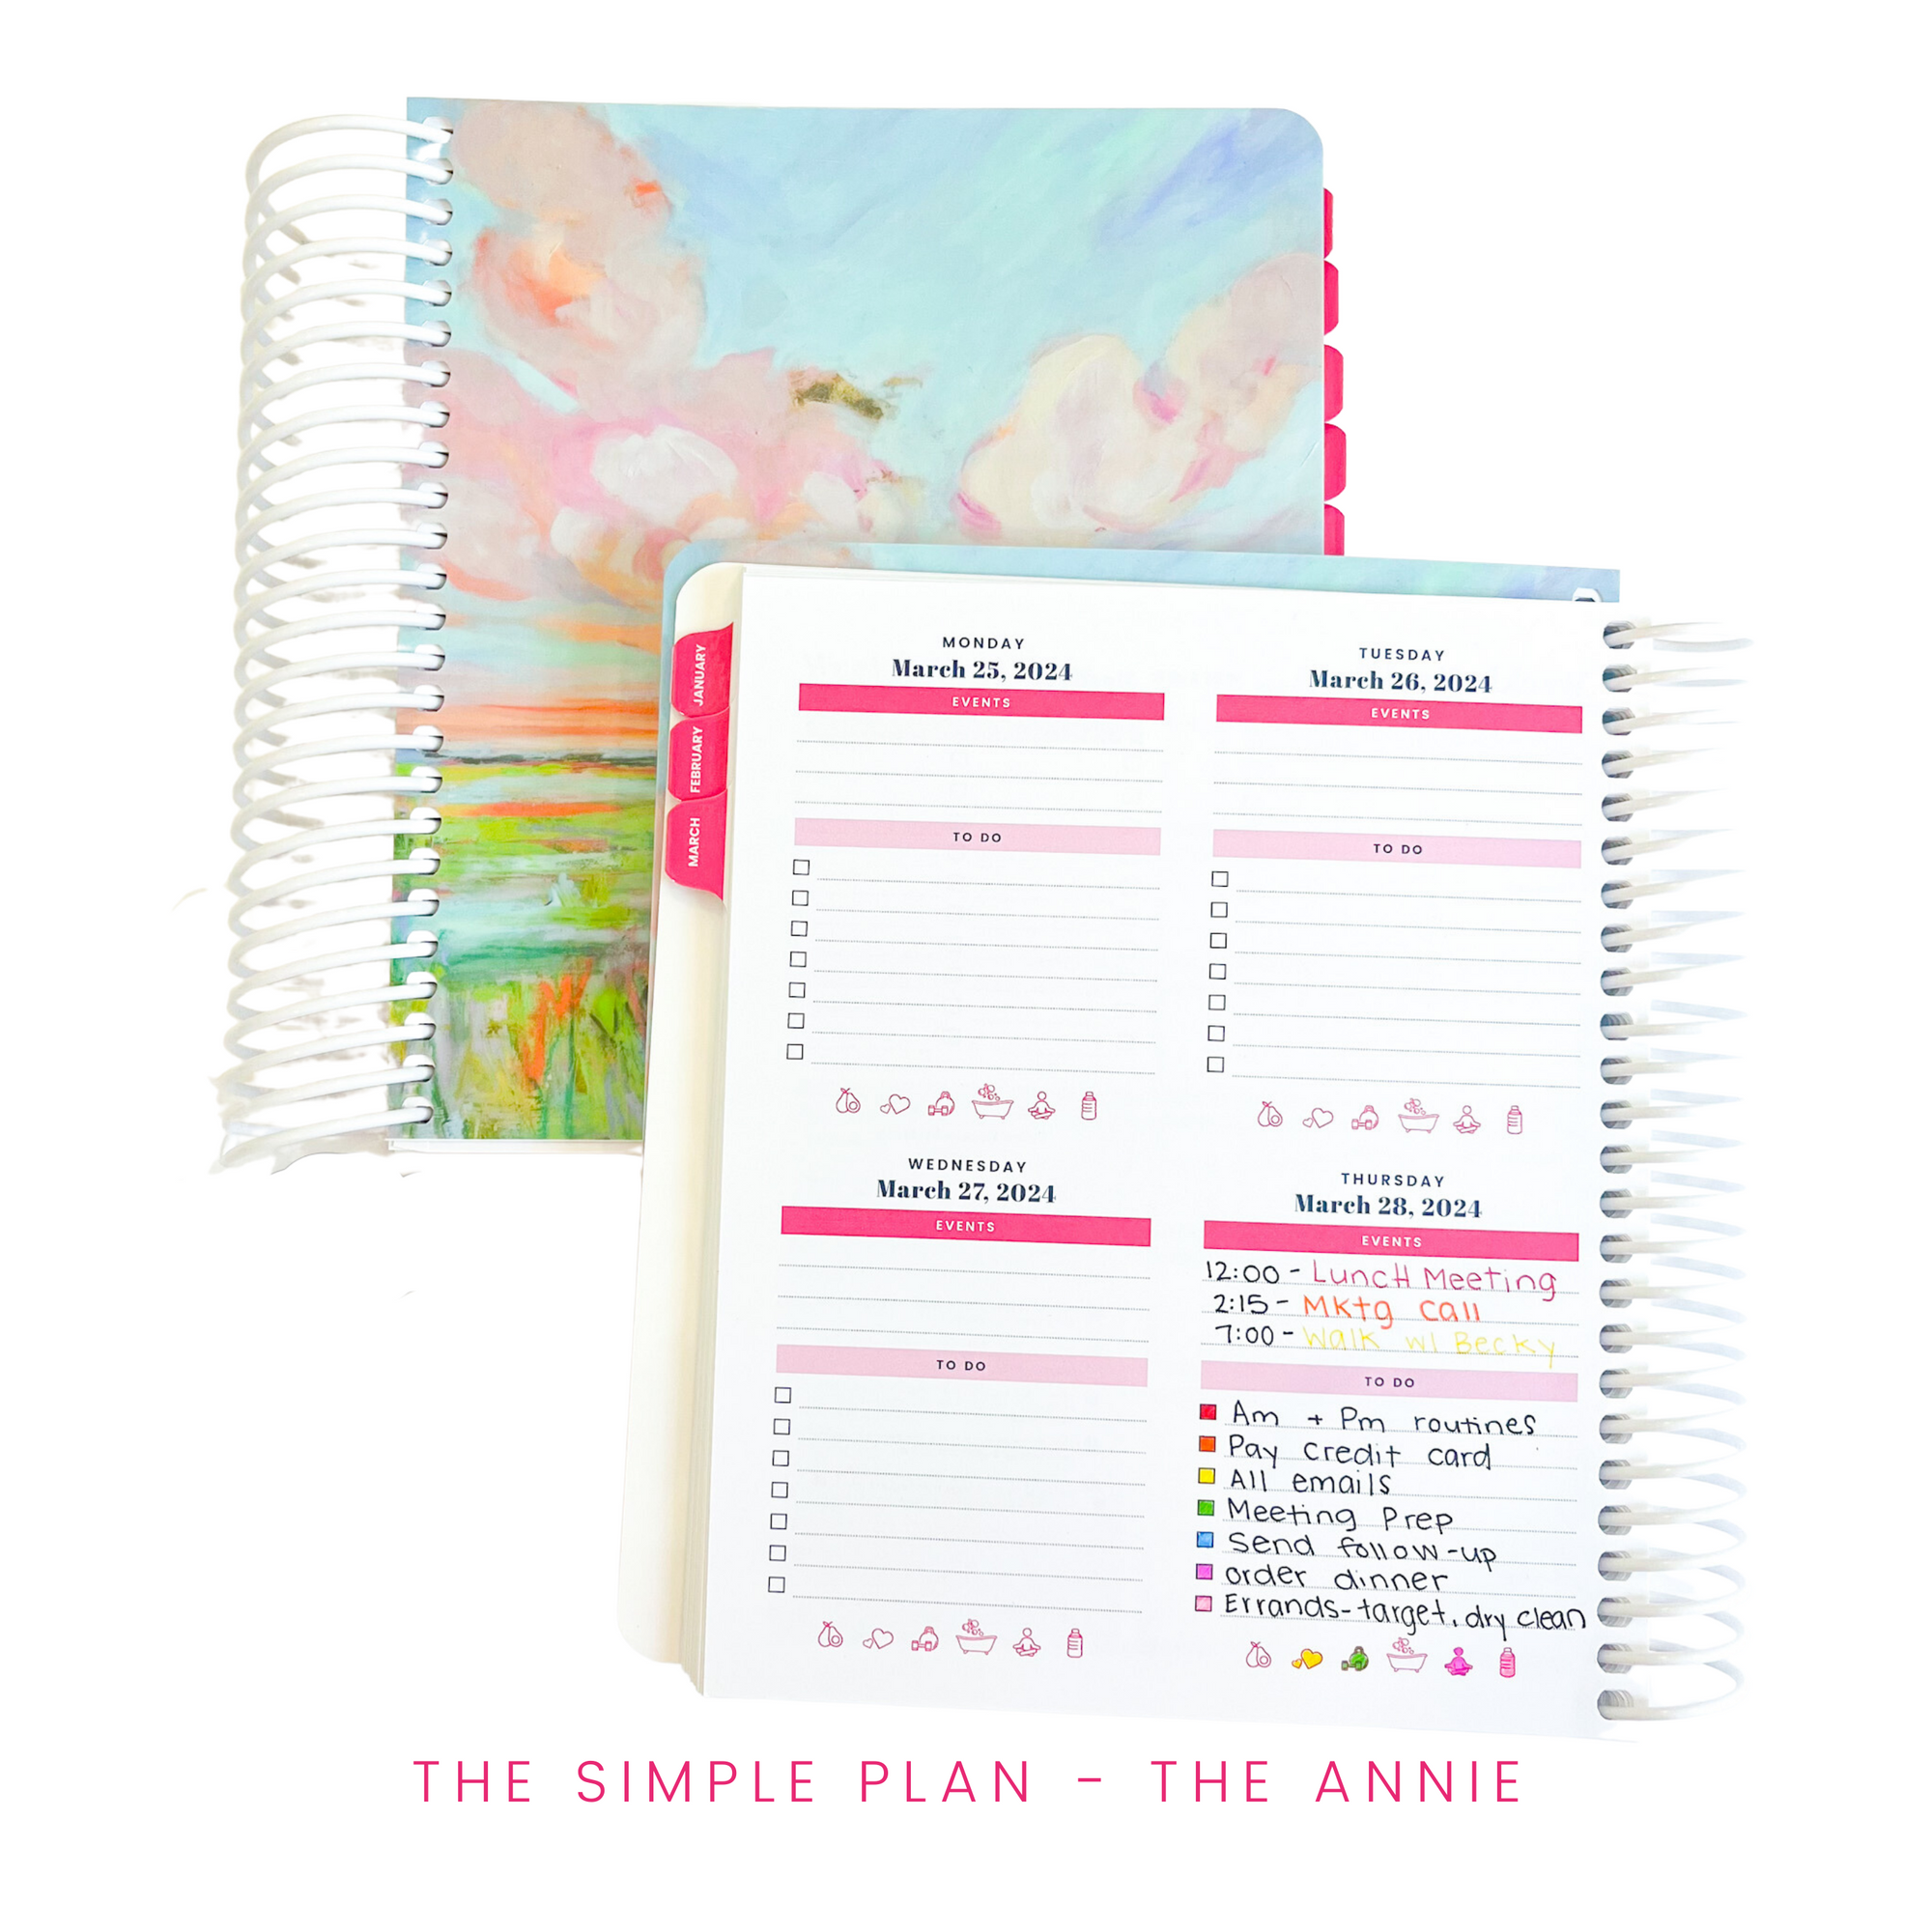 The Tote Organizer - The Plan By Lauren Truslow